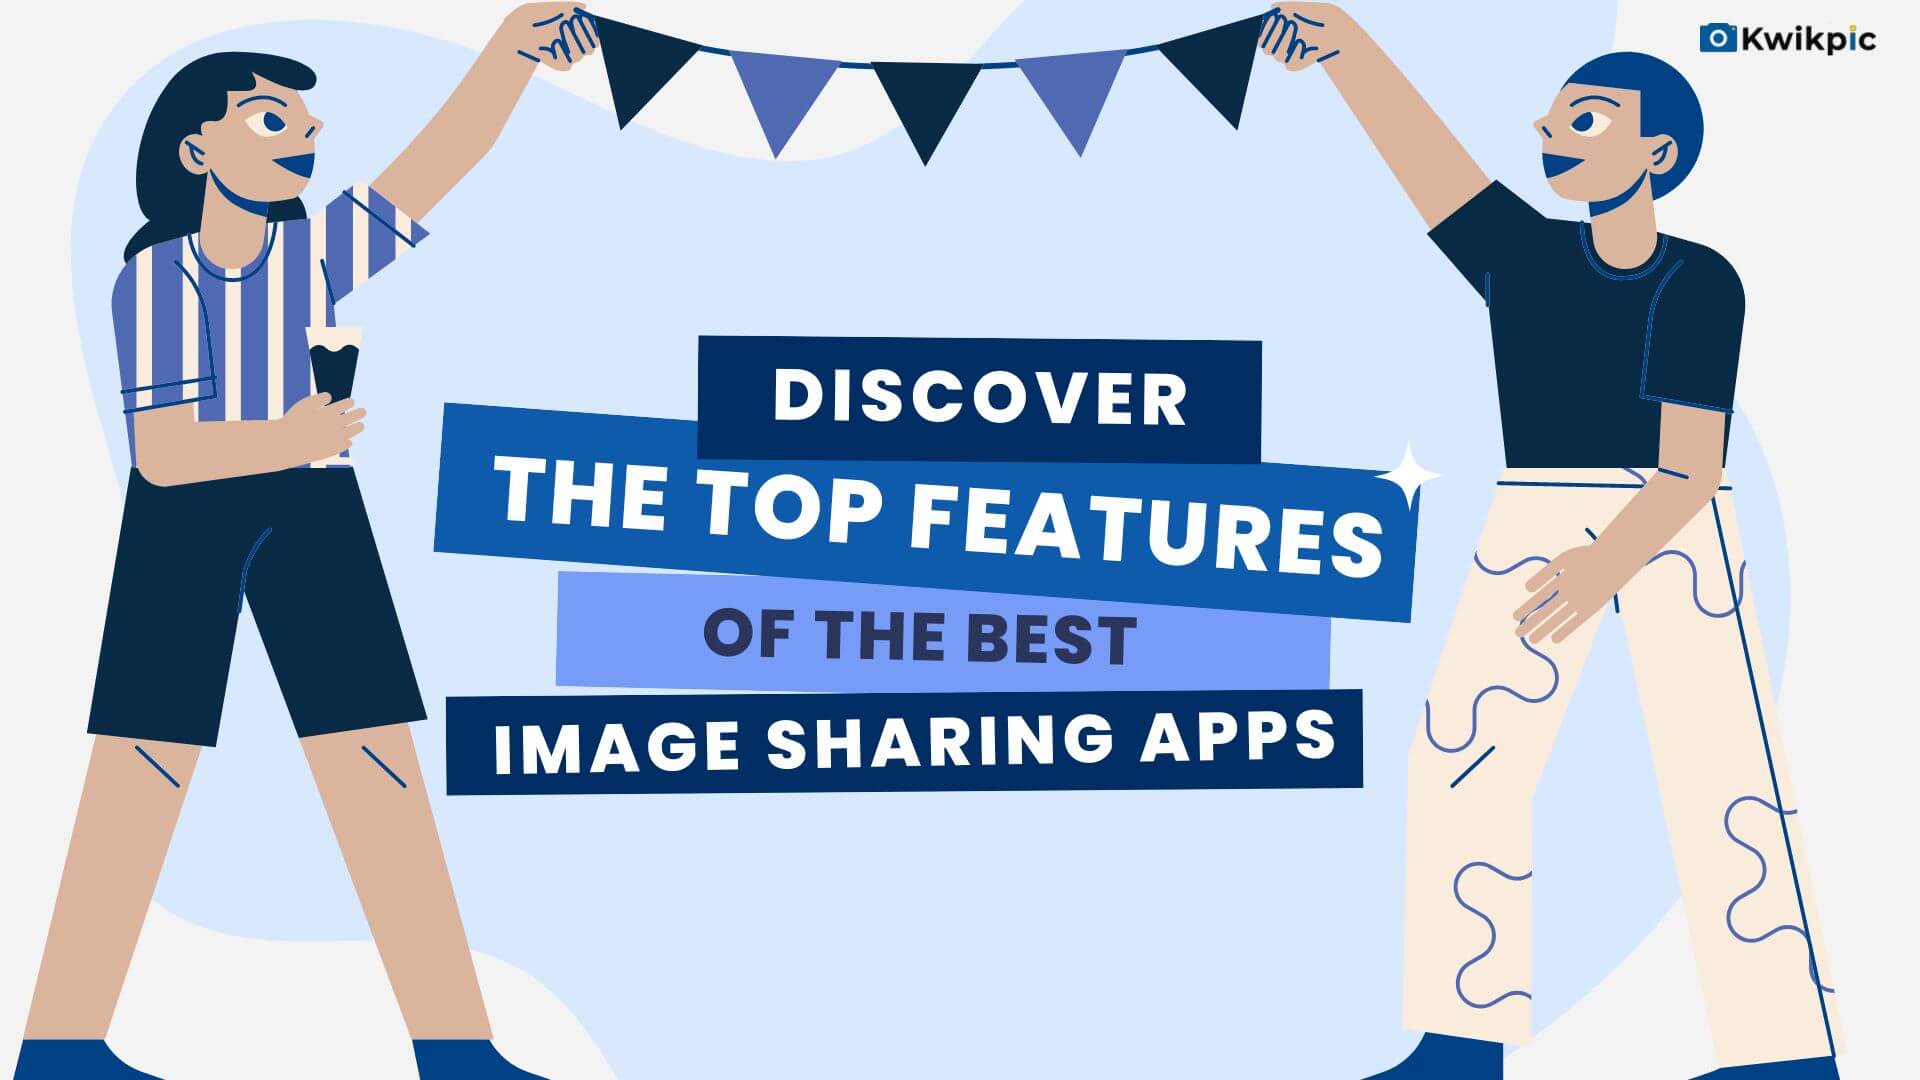 Sharing Snapshots: The Rise of Image Sharing with Kwikpic